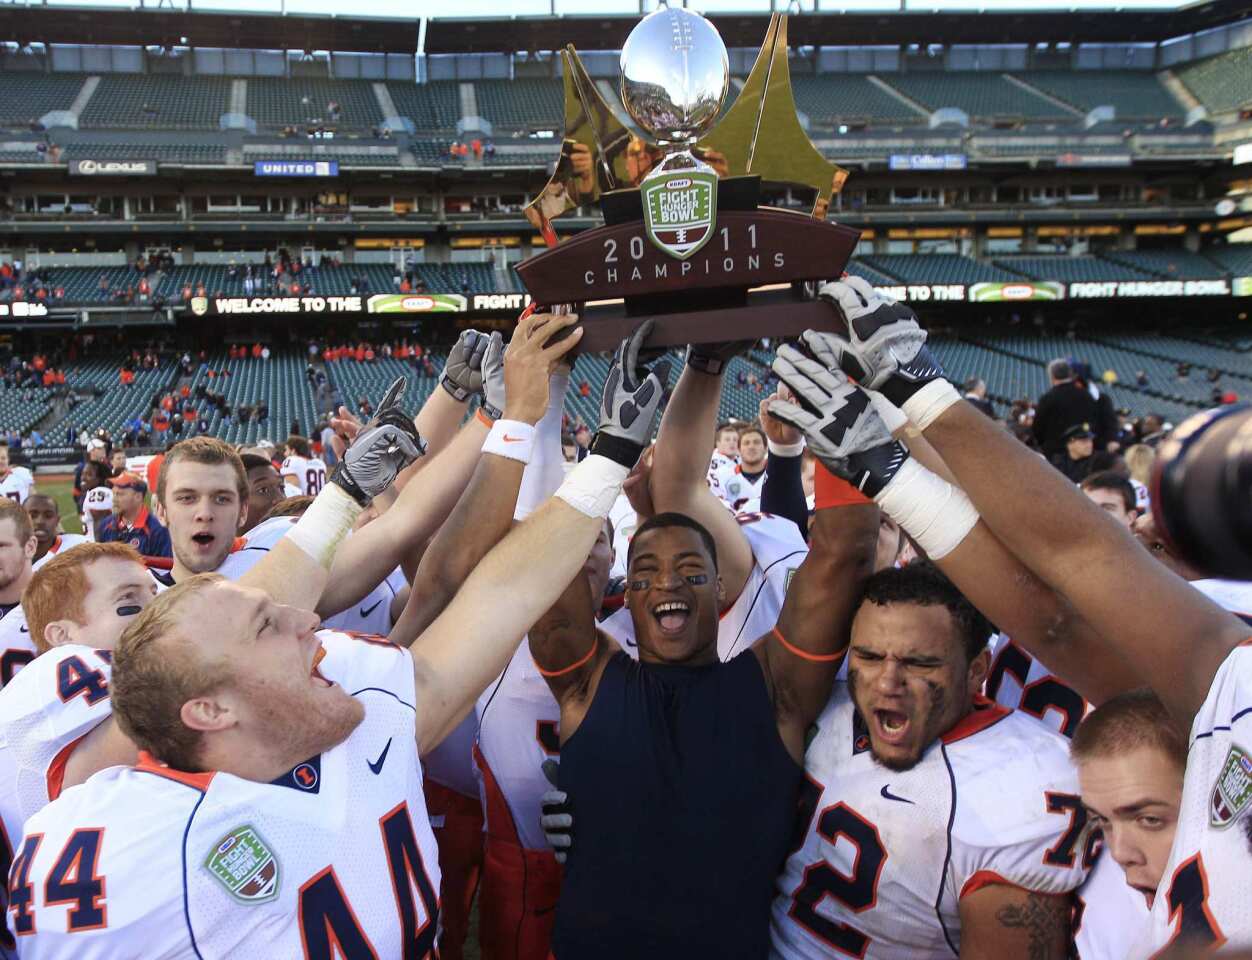 Illinois players hold aloft the Kraft Fight Hunger Bowl trophy after defeating UCLA, 20-14, on Saturday afternoon at AT&T Park in San Francisco.